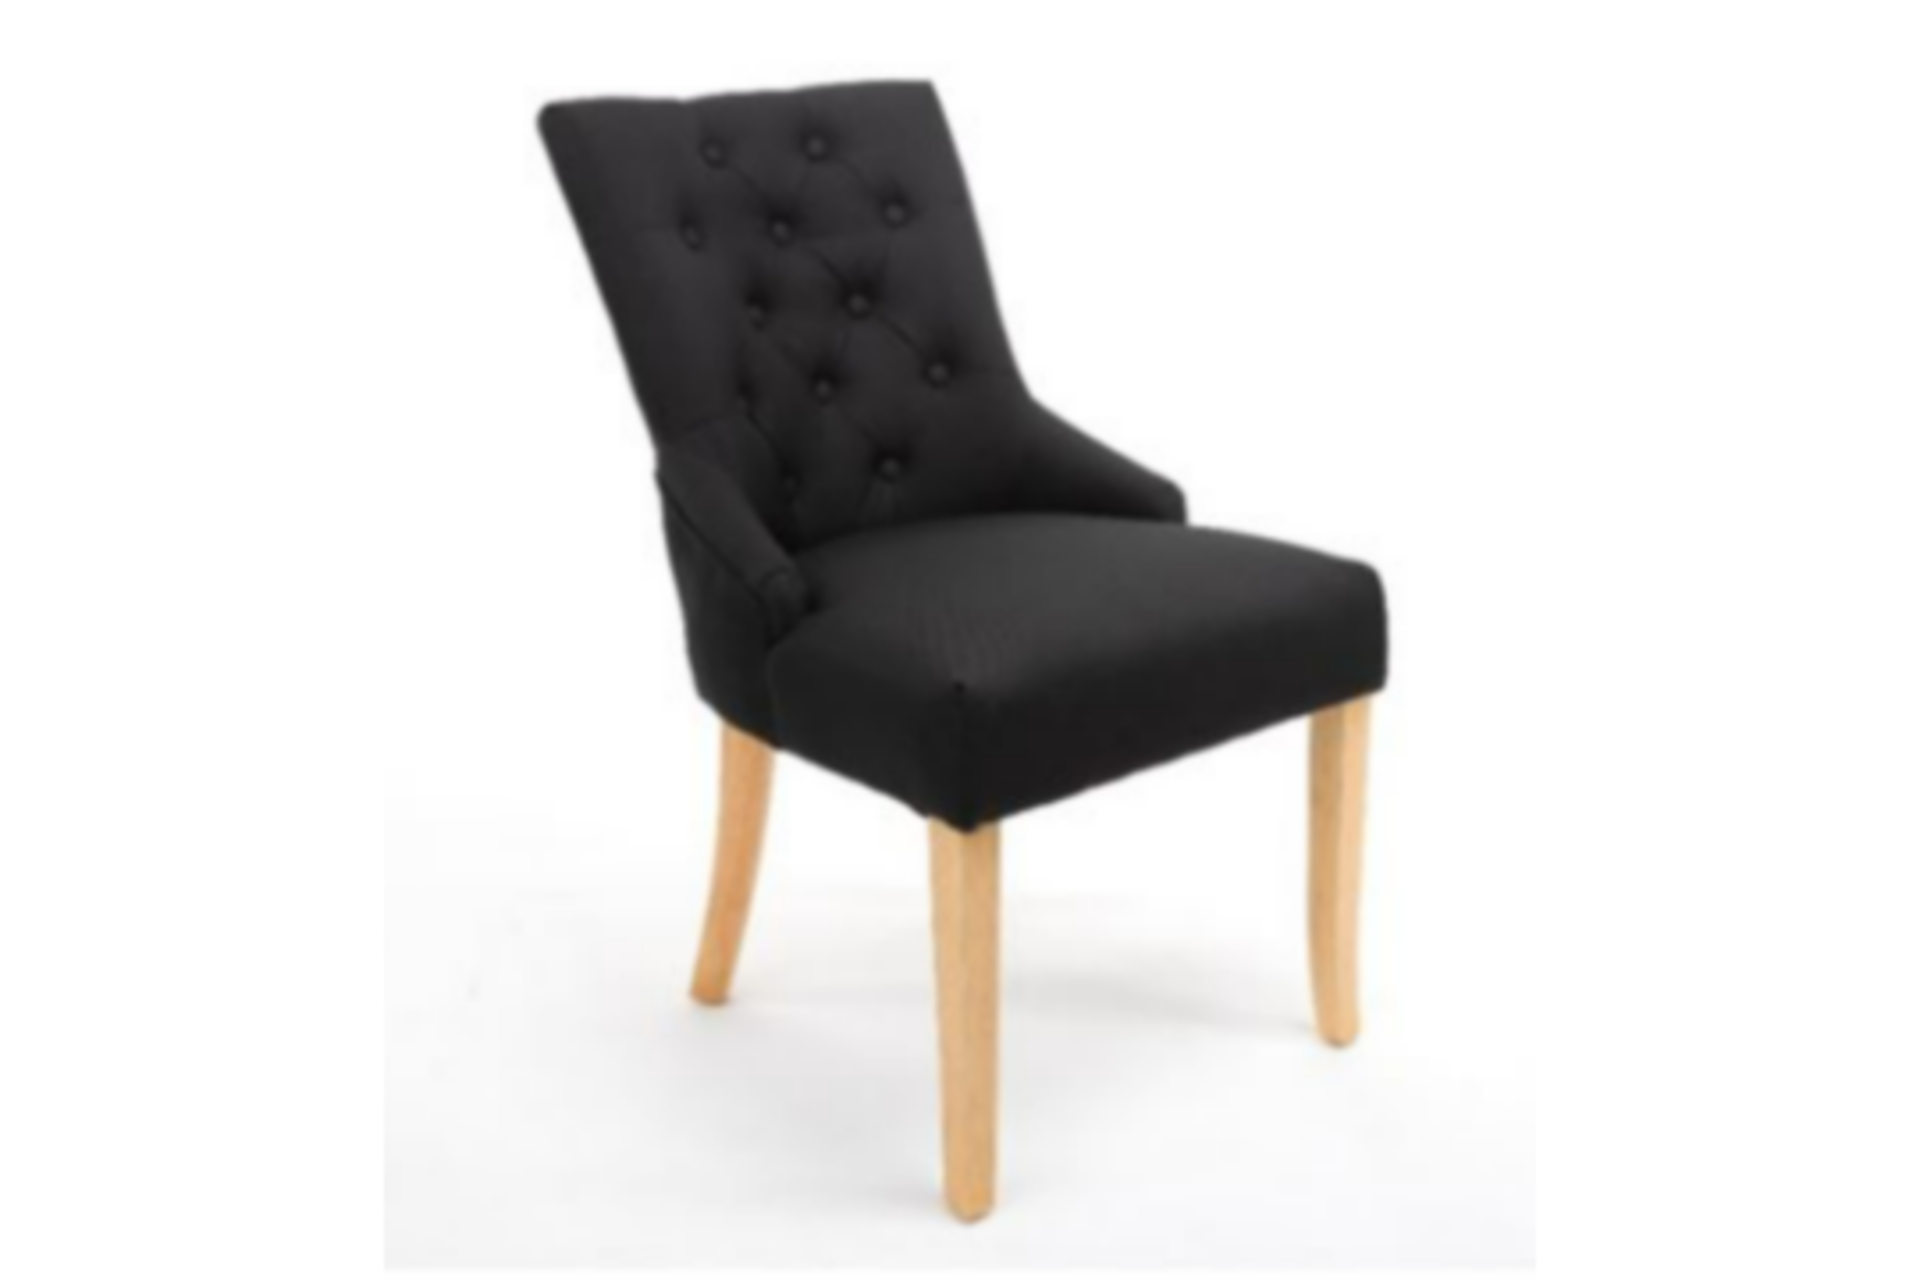 4 X BRAND NEW BOXED LUXURY CLASSIC ACCENT LINEN FABRIC DINING CHAIRS. BLACK. RRP £149.99 EACH (